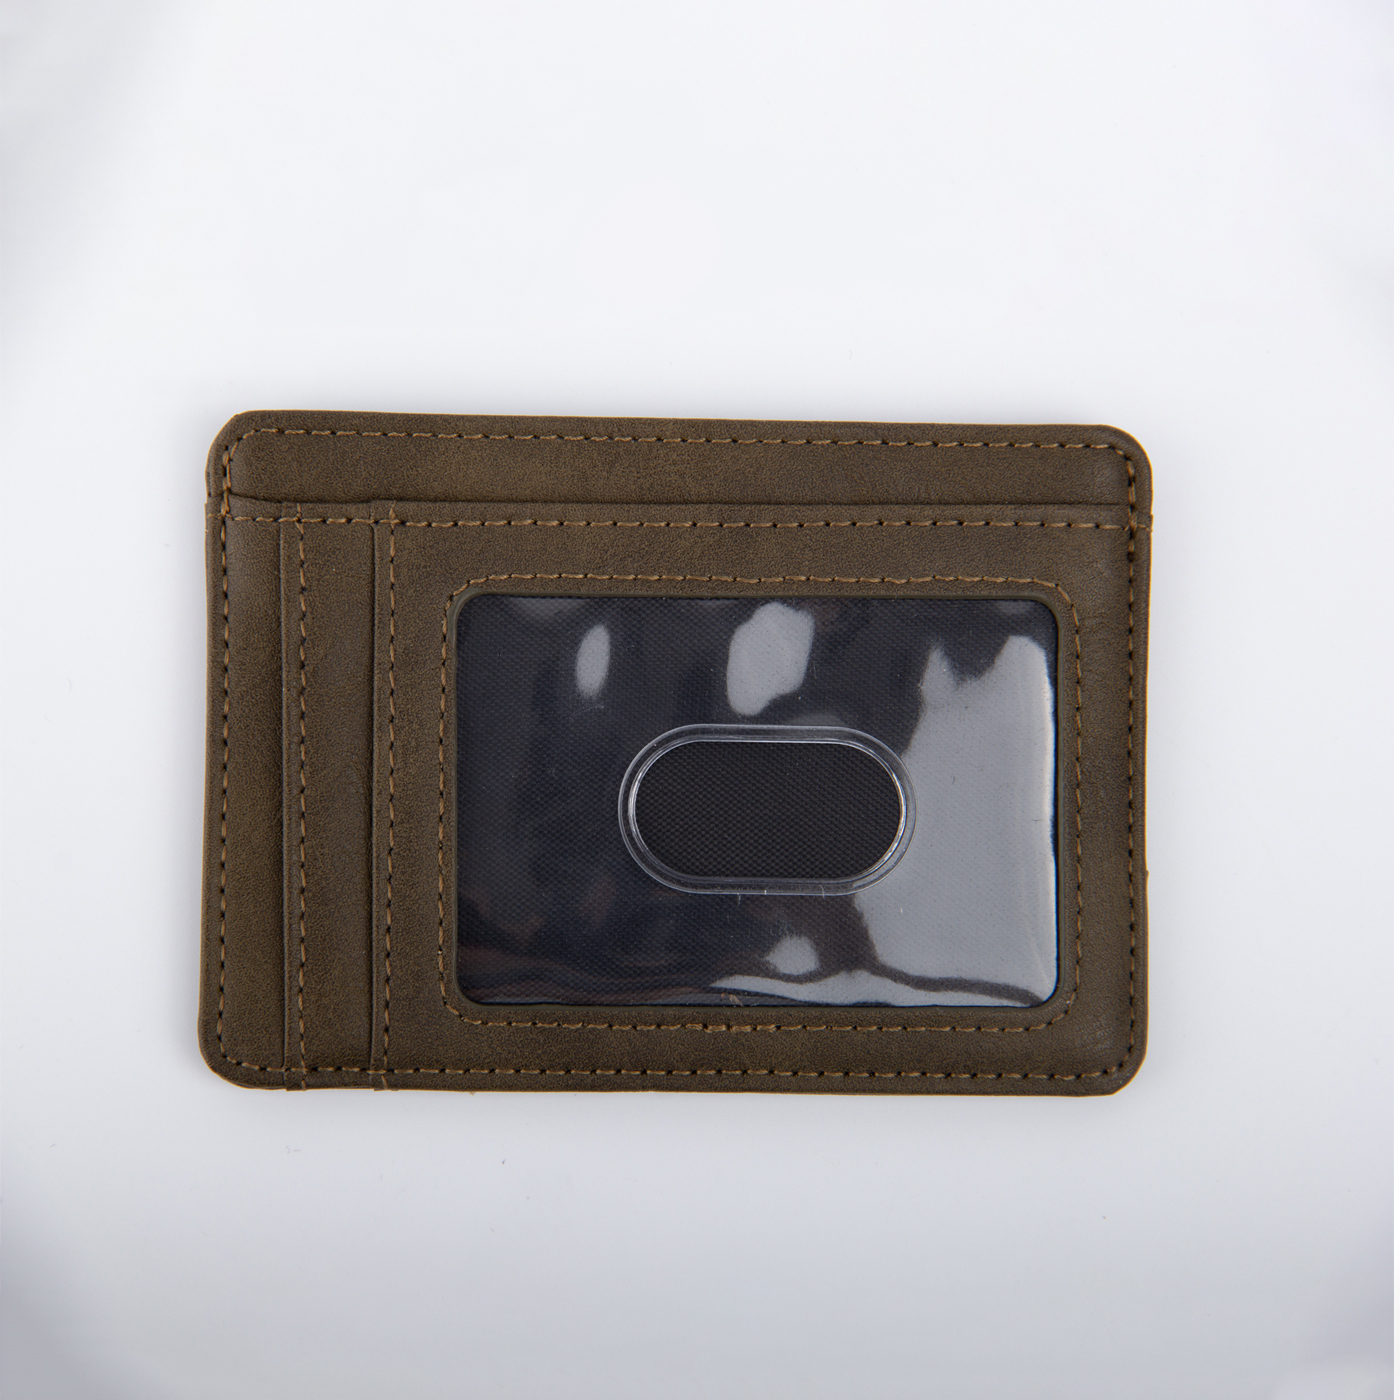 PU Leather Card Holder With RFID Protection3